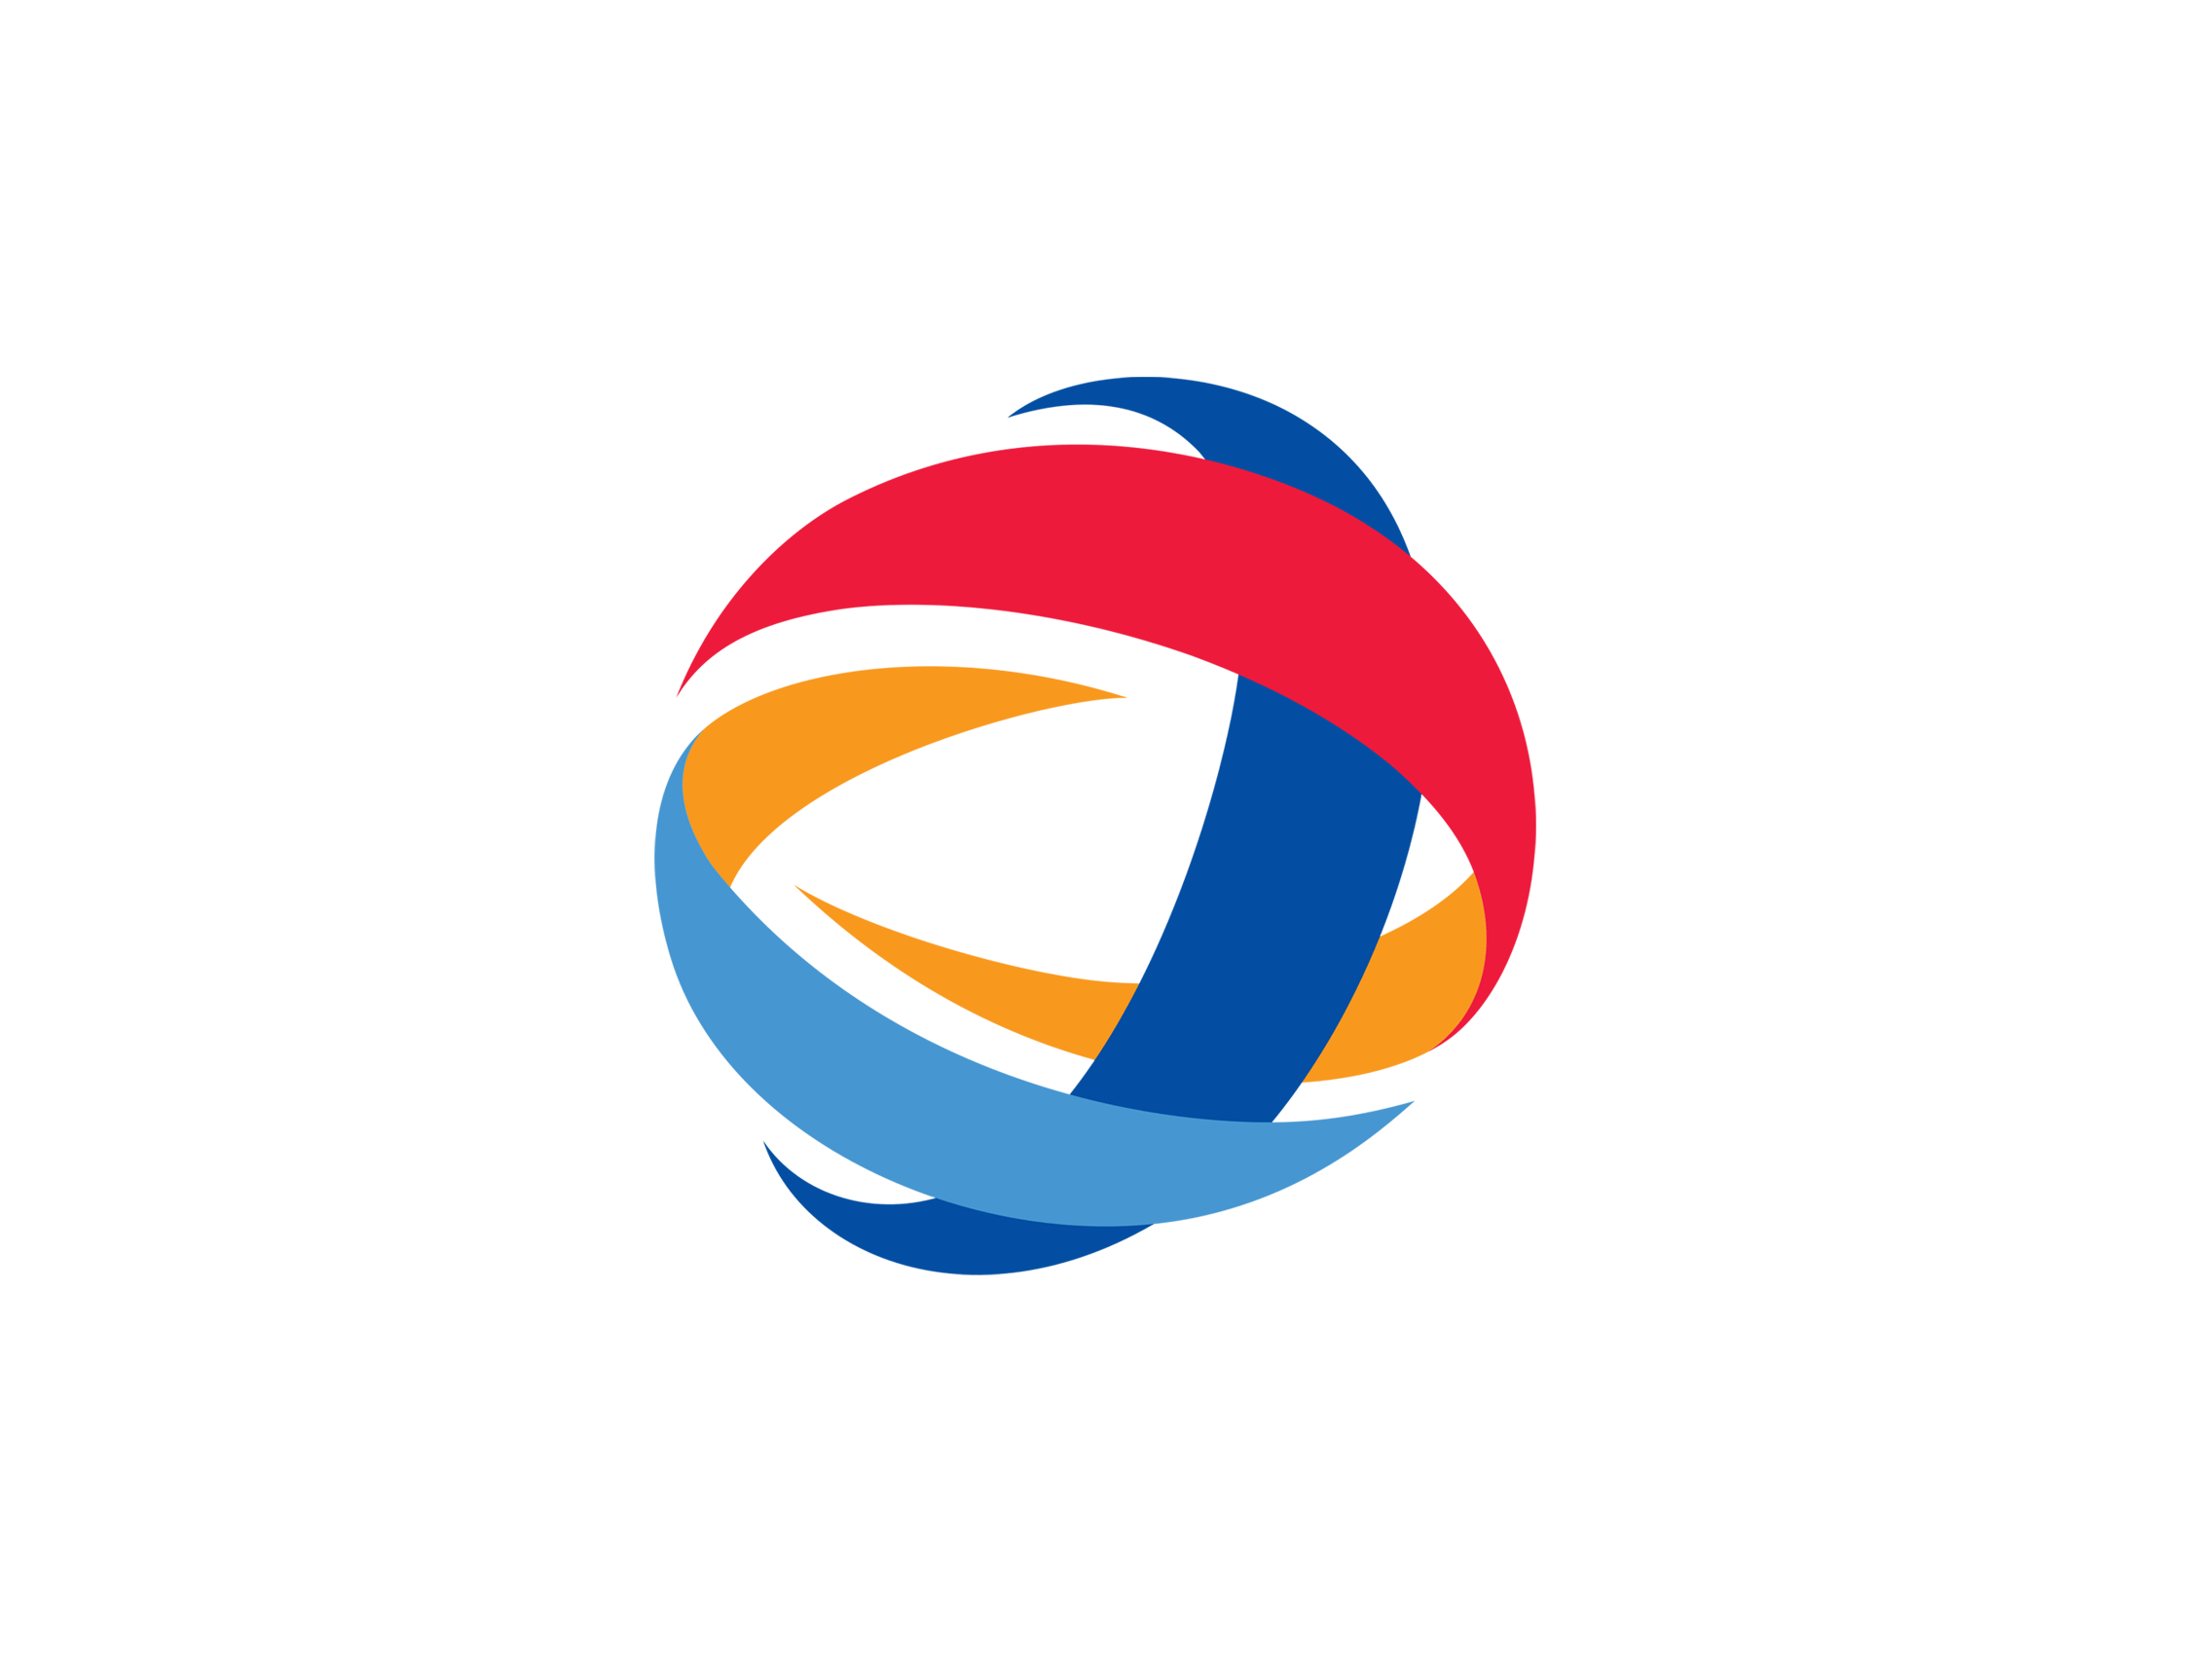 Red and Blue Company Logo - Red blue and orange Logos